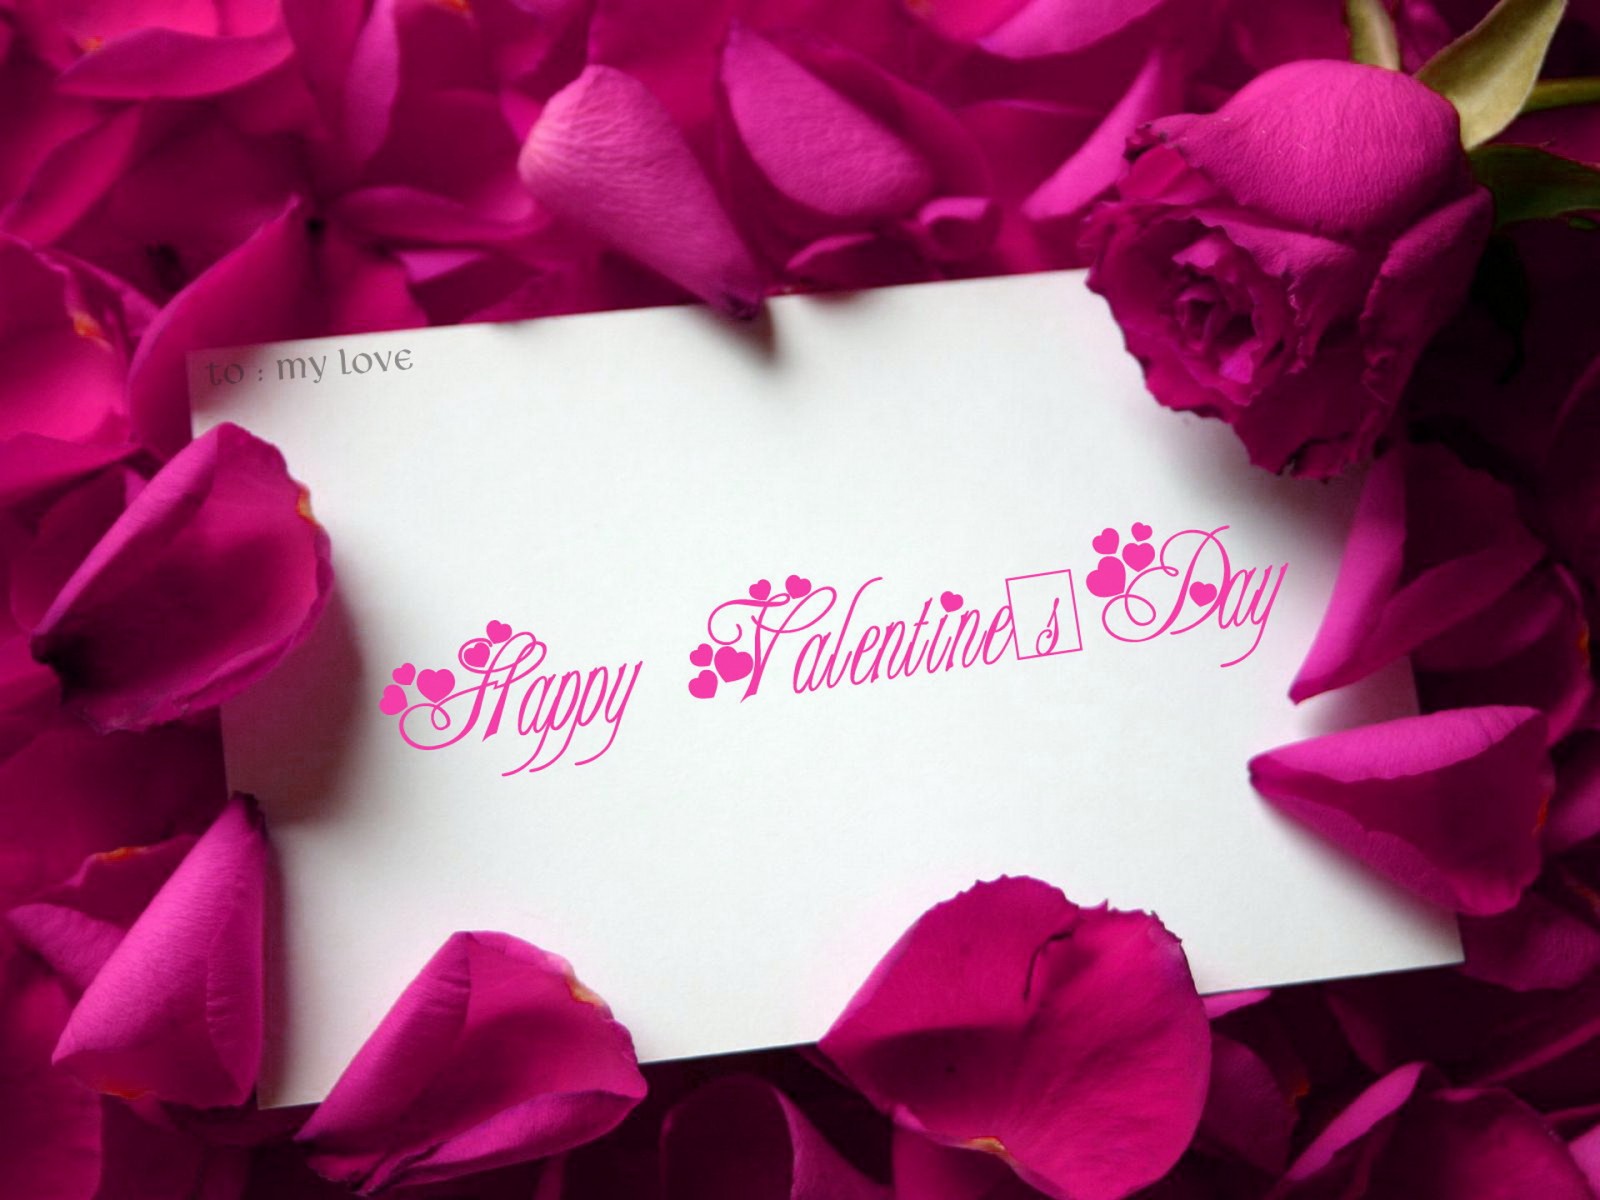 Happy Valentines Day Wallpaper High Definition Quality